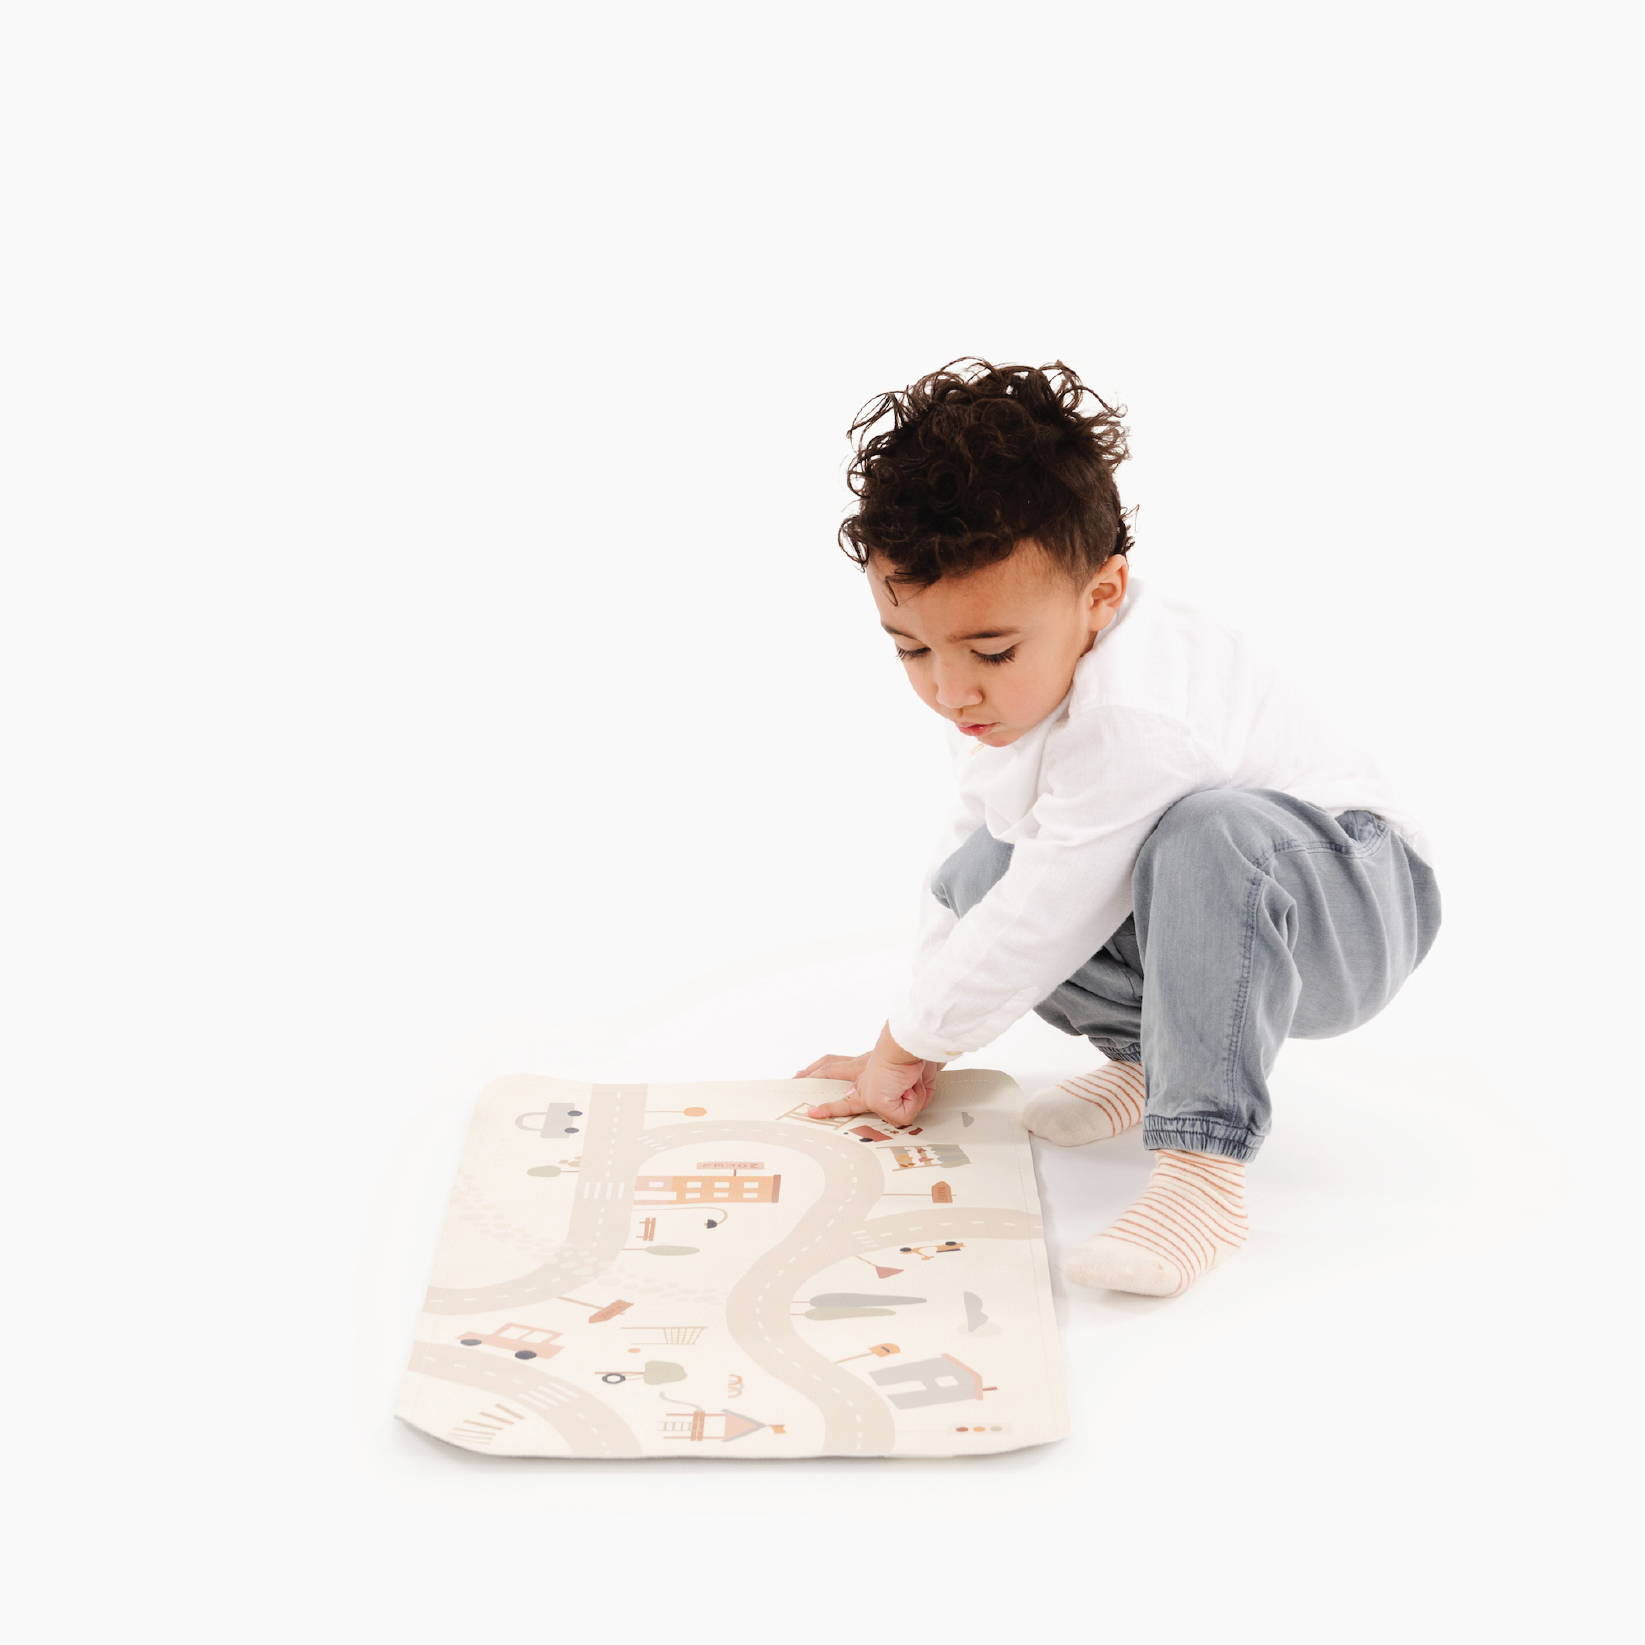 Kid playing with Gathre Playmat